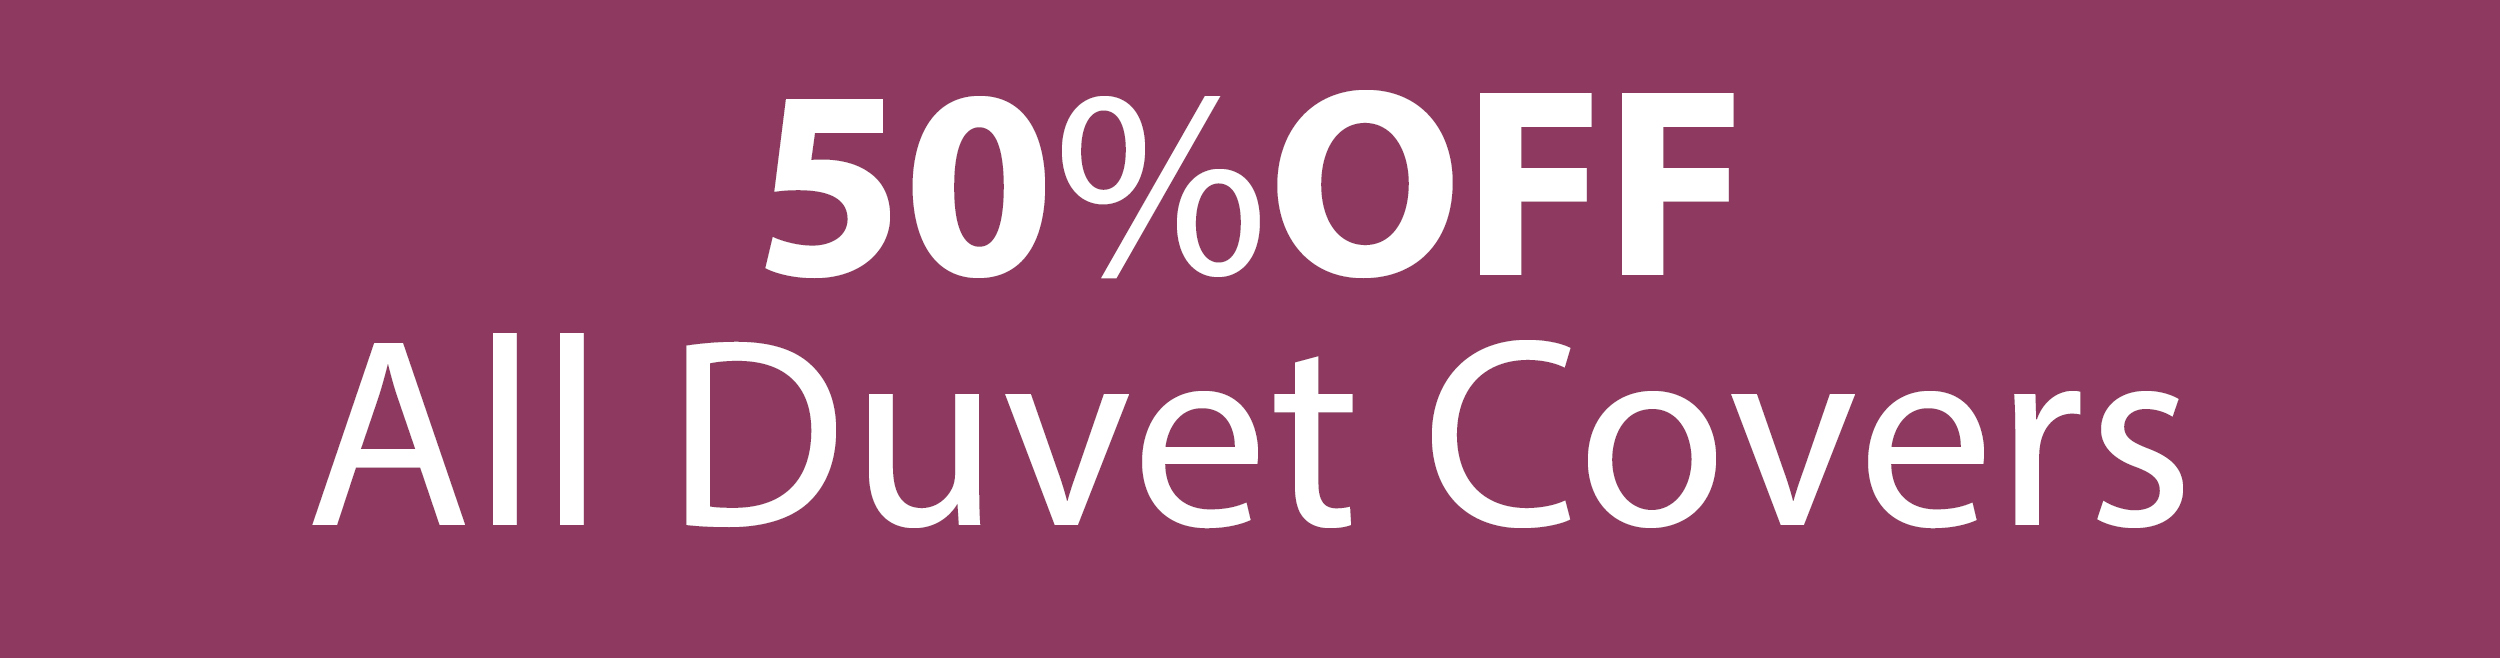 50% Off All Duvet Covers 